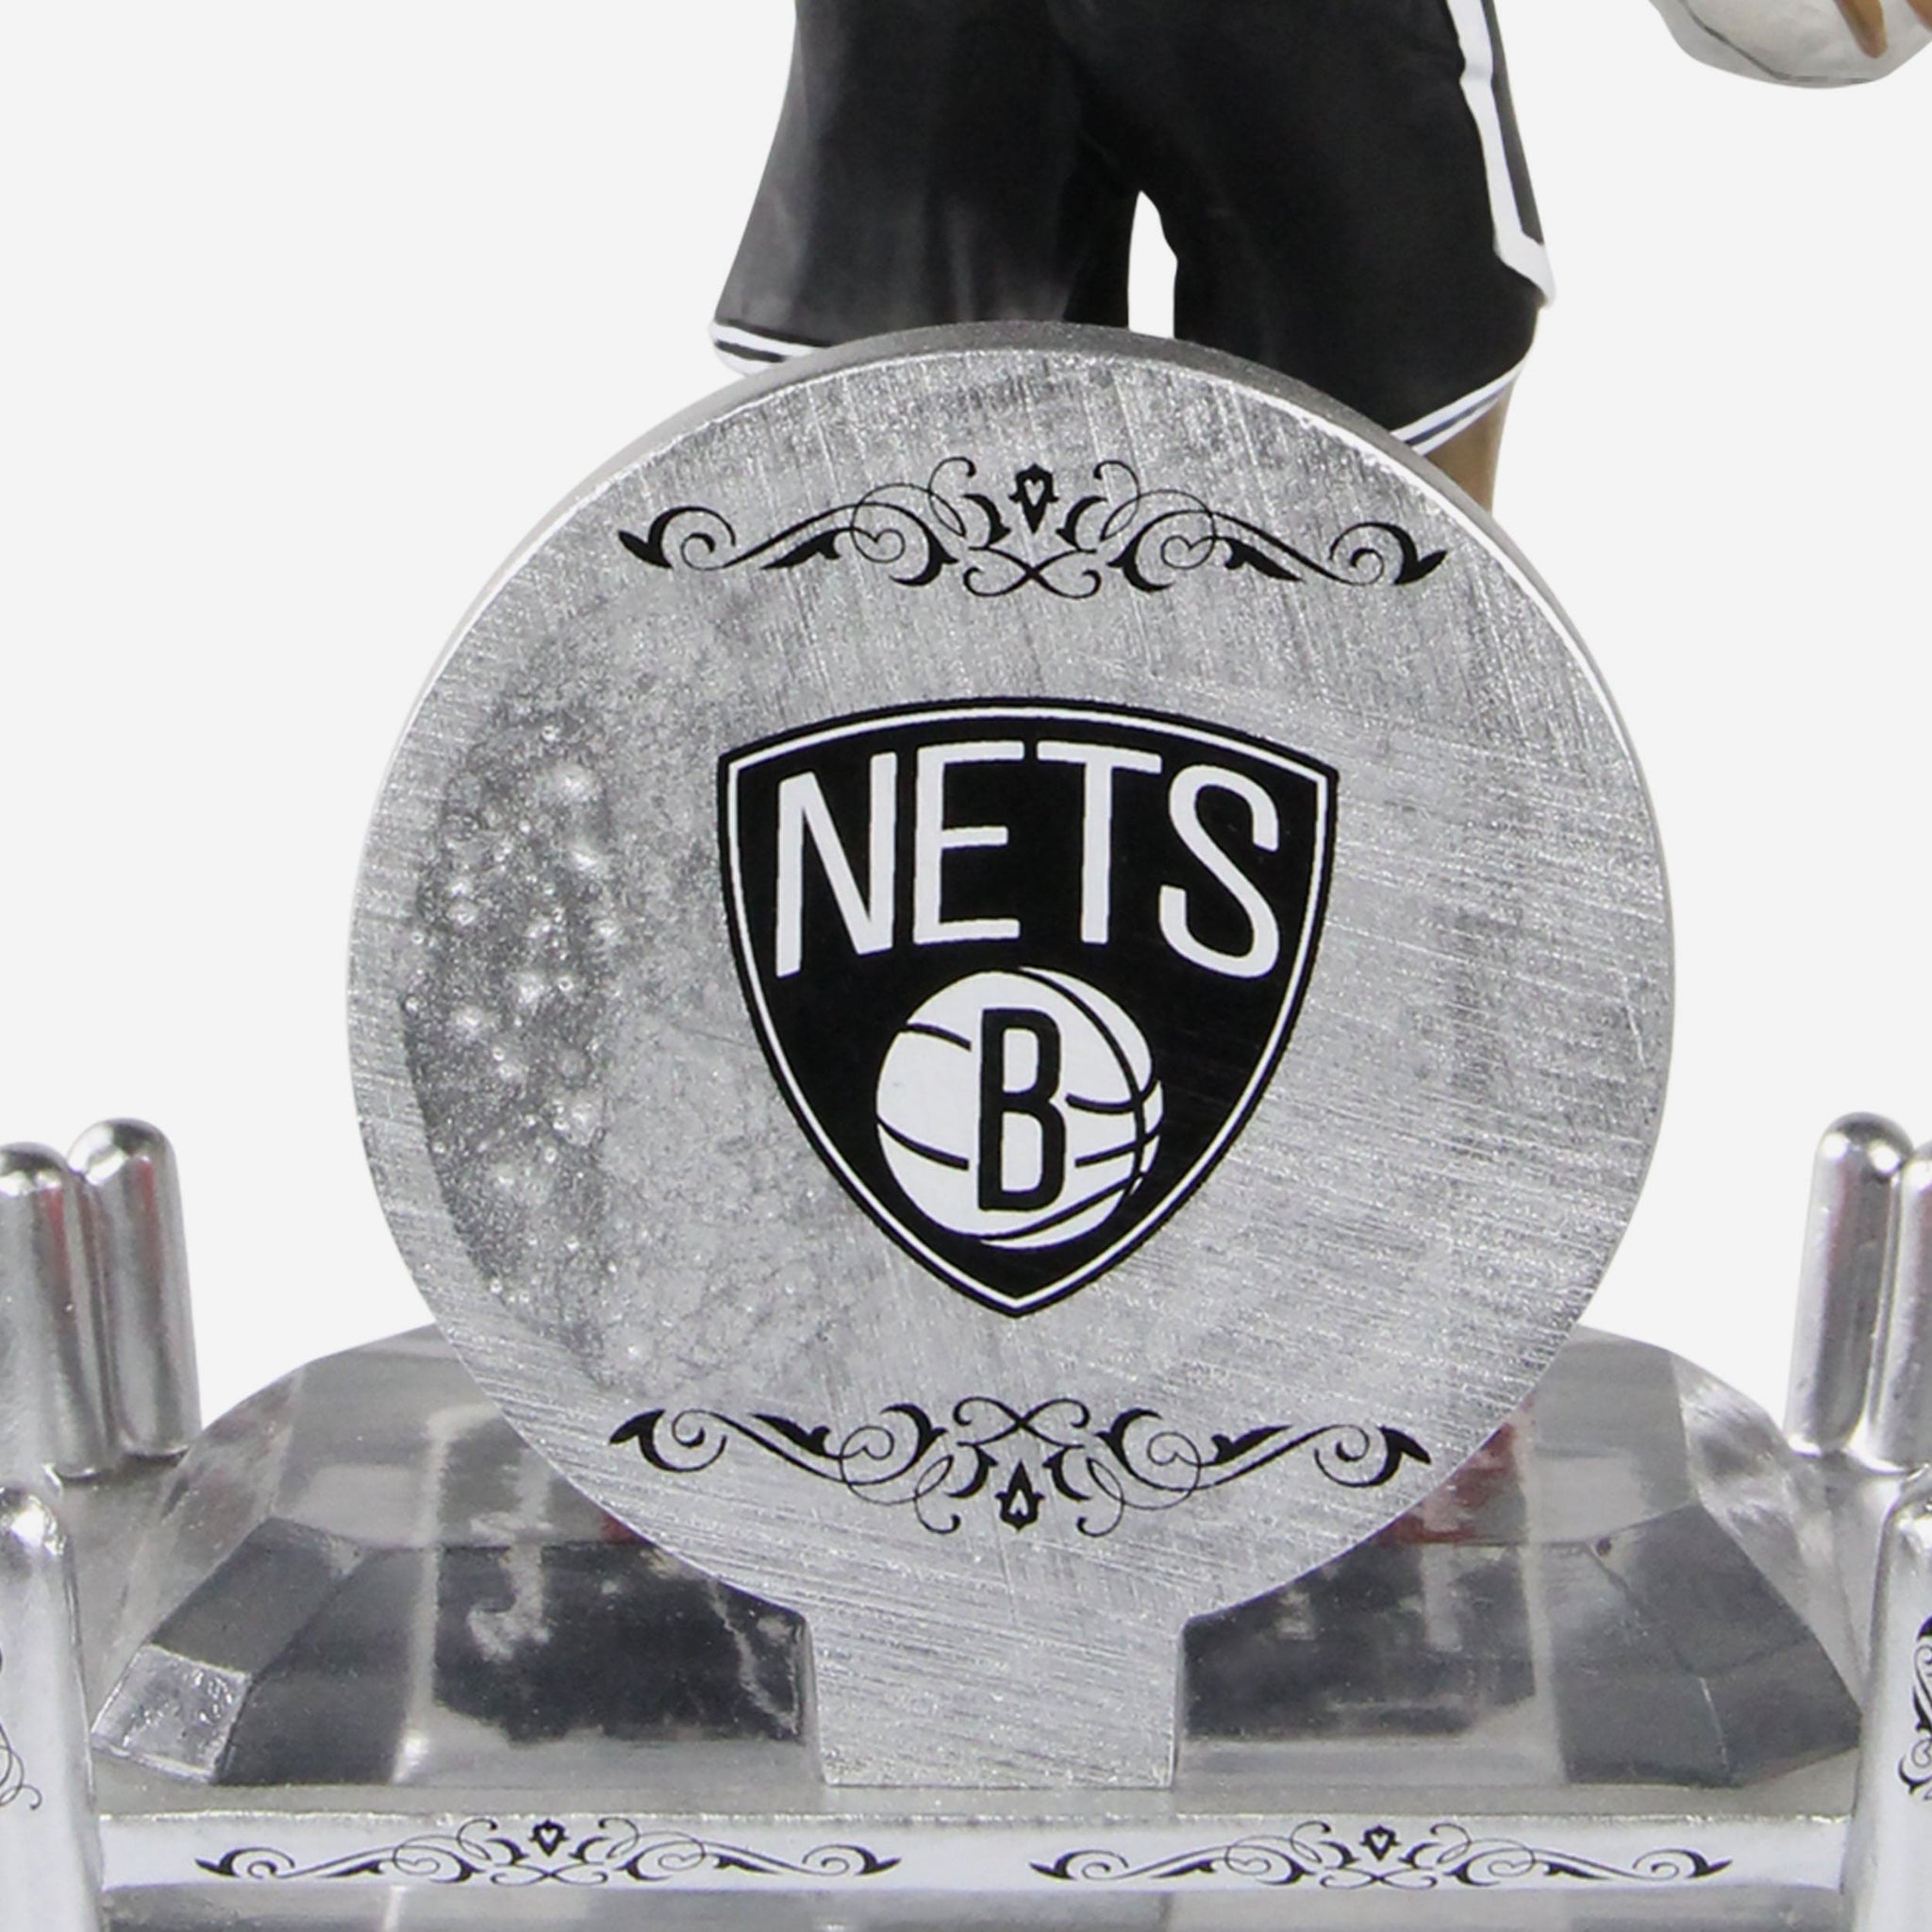 Check out these Brooklyn Nets NBA 75 bobbleheads